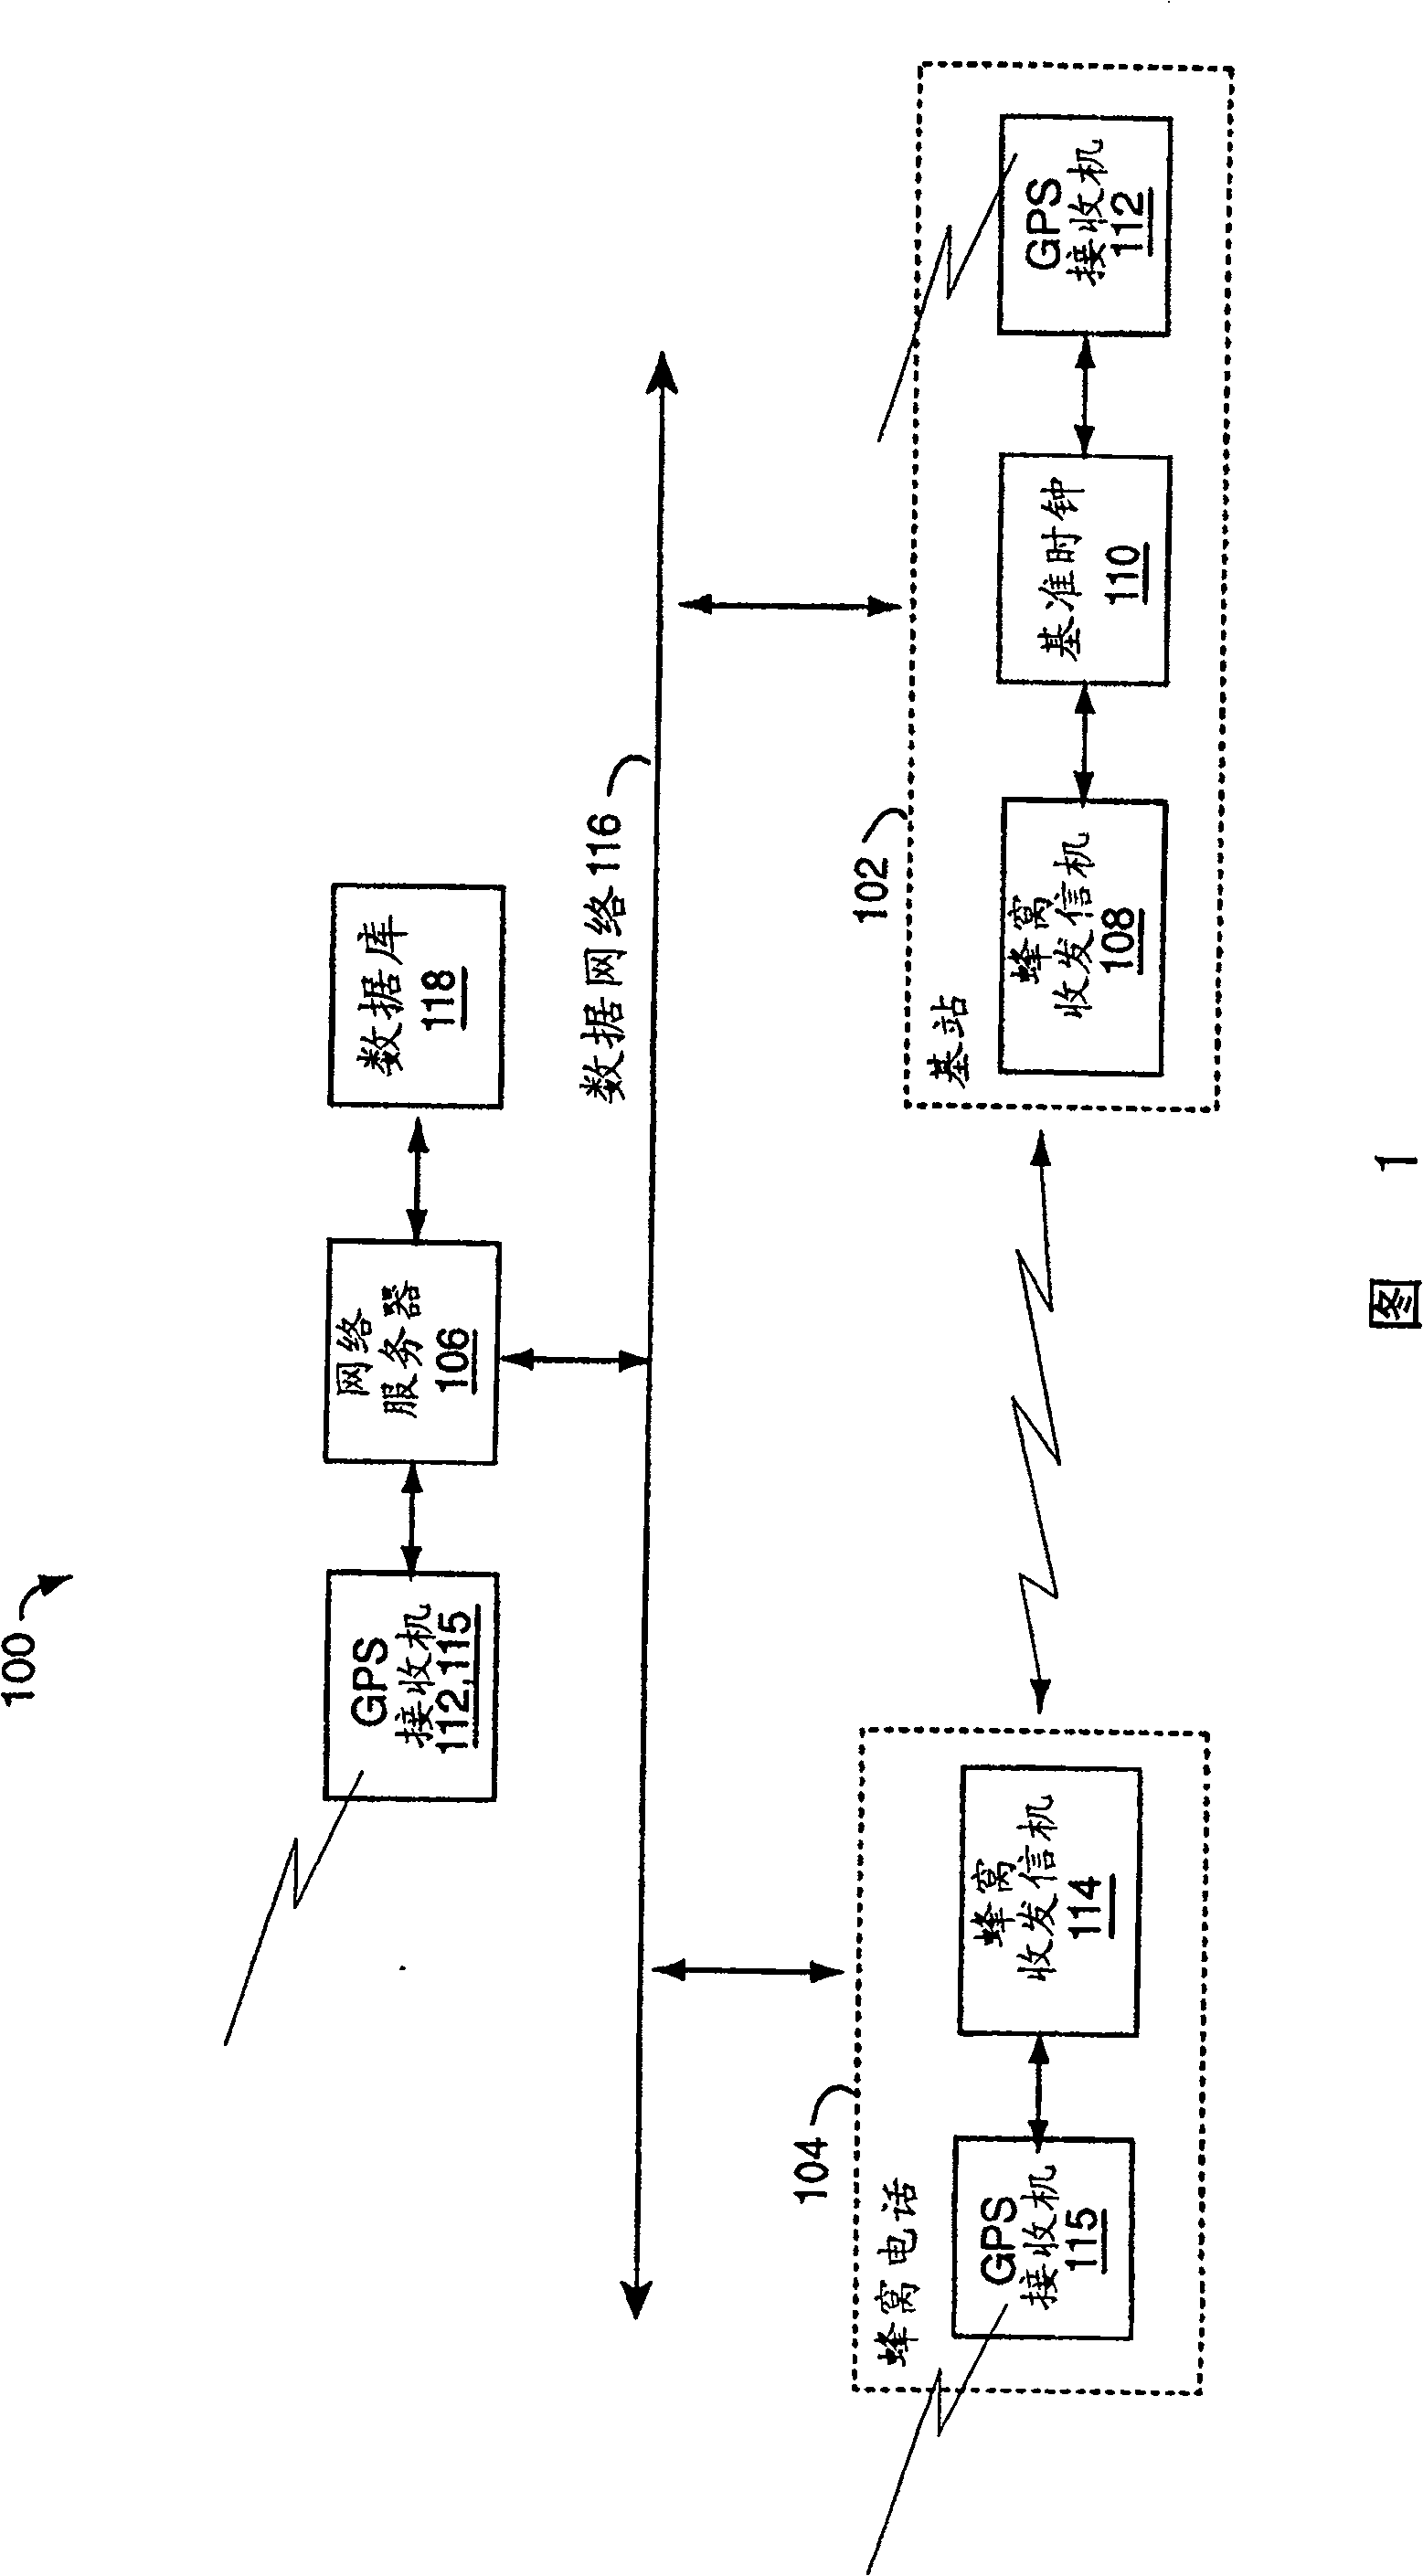 Receiver for assisting satellite in navigation with foundation facilities, and method therefor